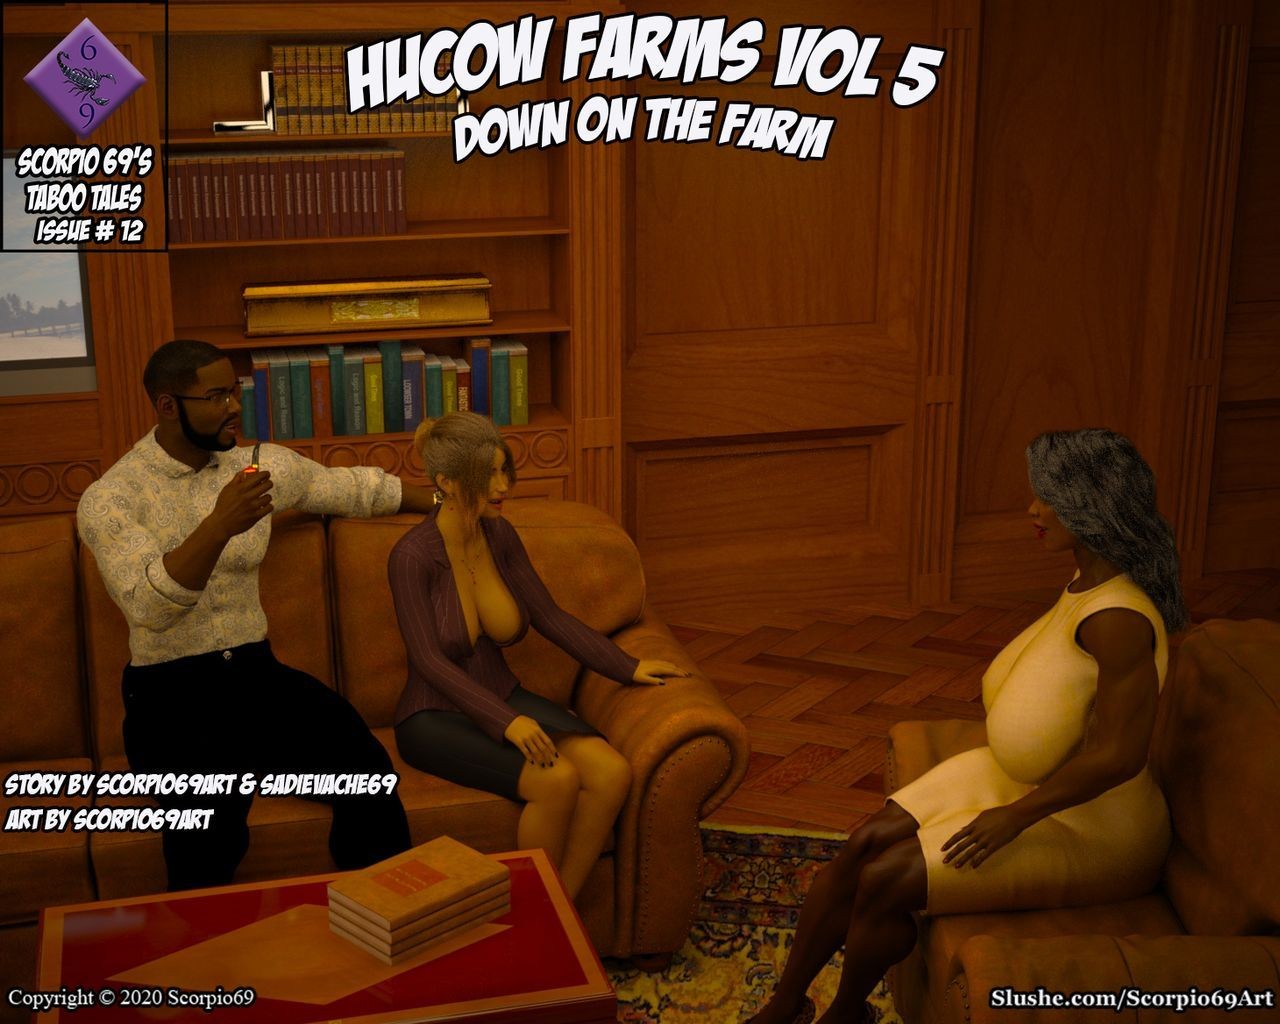 Real Orgasms Hucow Farms Vol 5 - Down On The Farm (Ongoing) Mmf